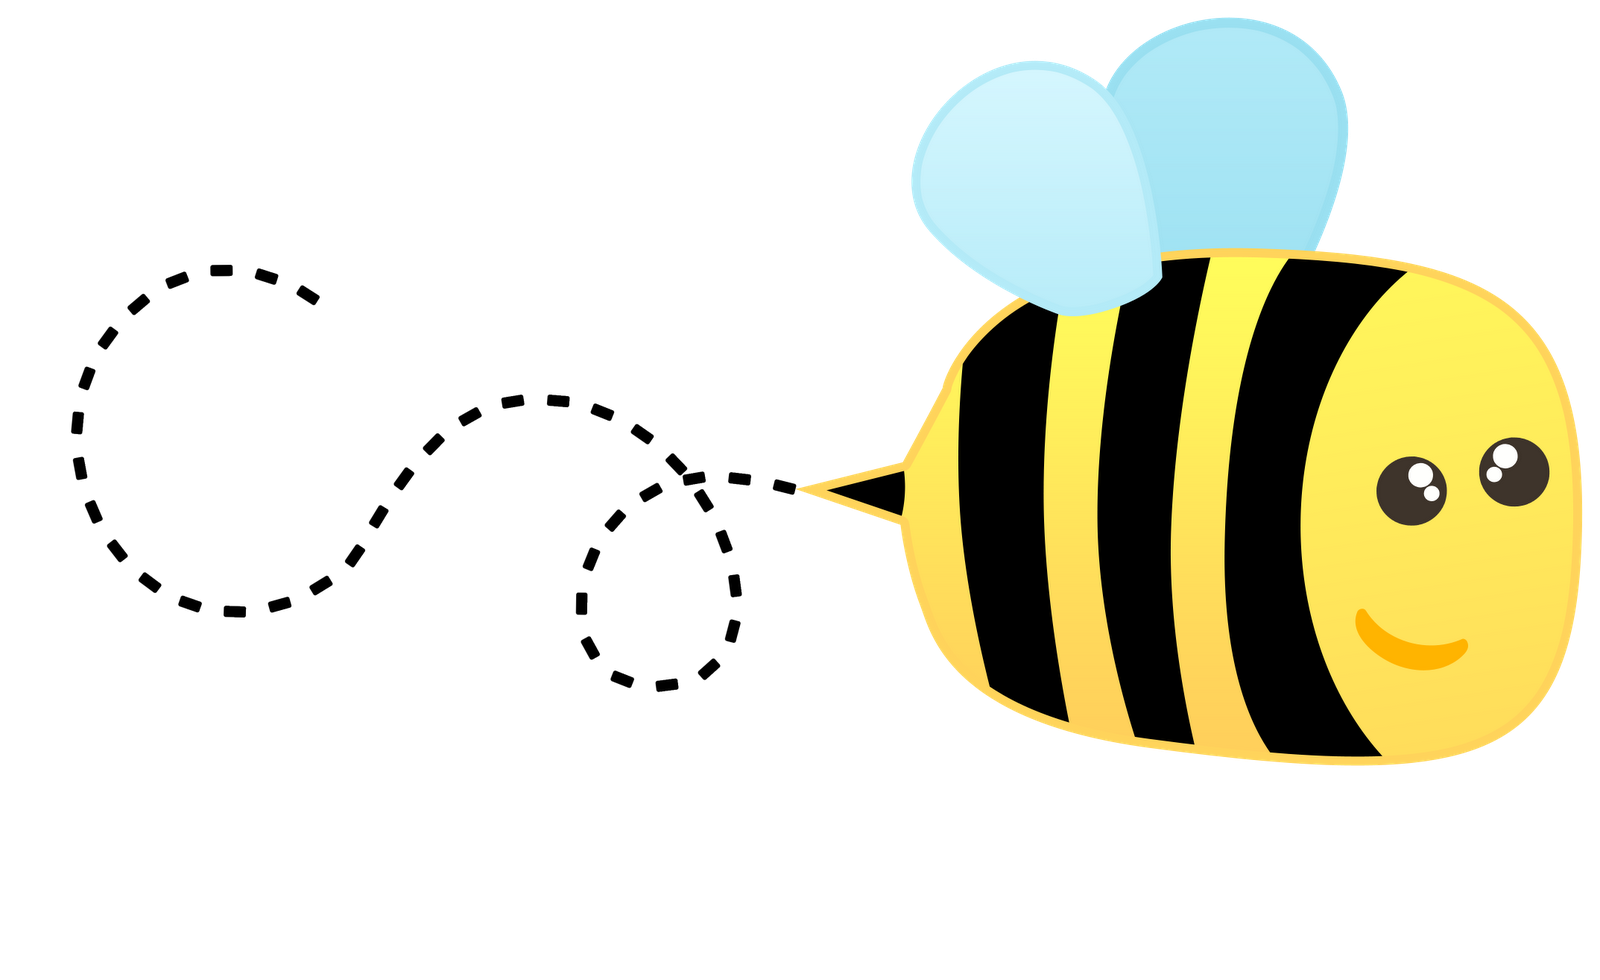 Buzzing Bee Clipart | Clipart Panda - Free Clipart Images